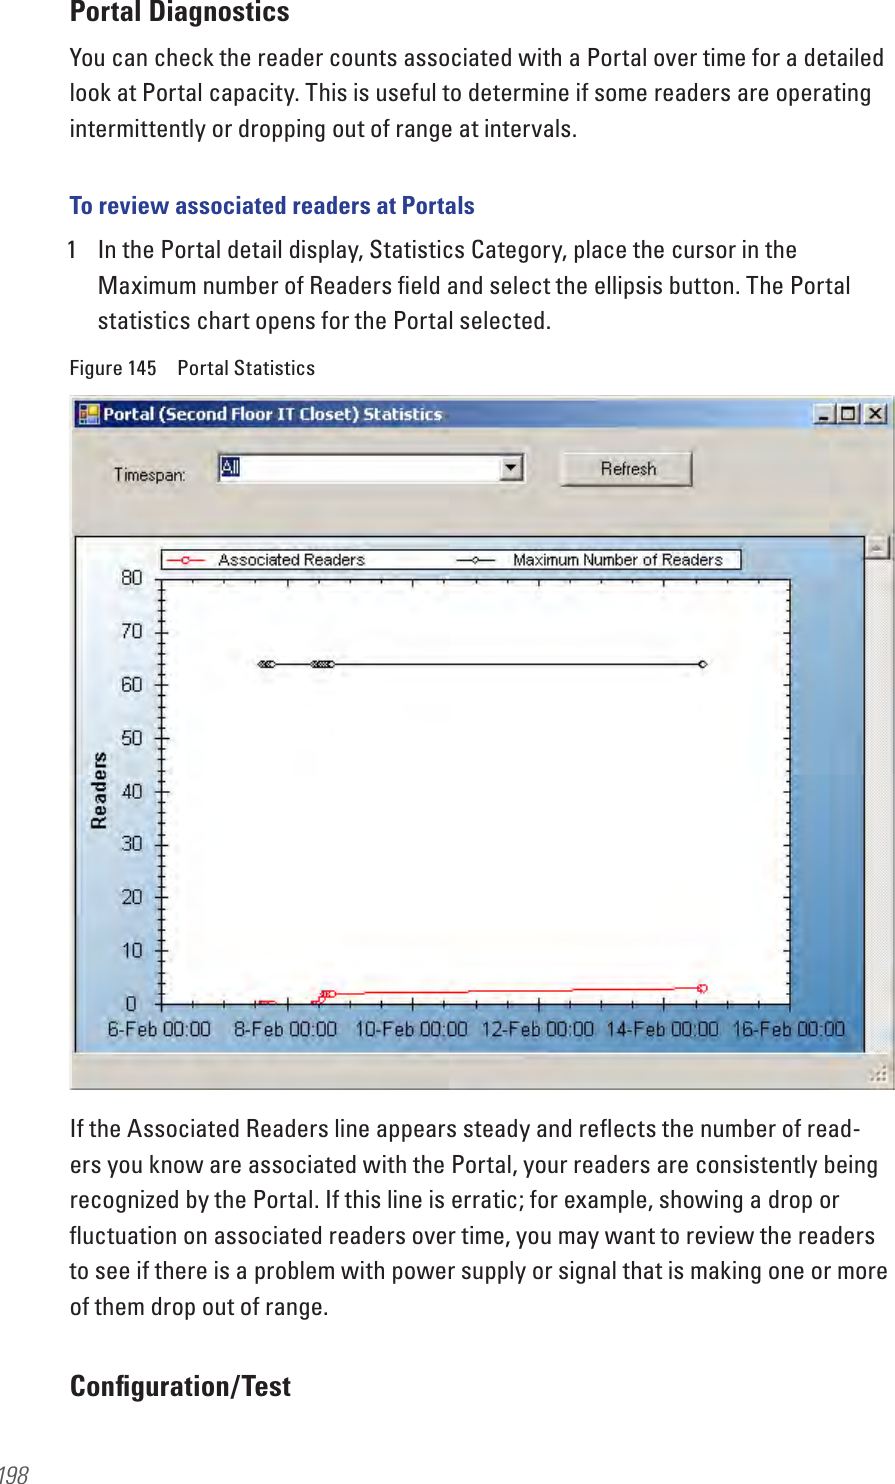 198Portal DiagnosticsYou can check the reader counts associated with a Portal over time for a detailed look at Portal capacity. This is useful to determine if some readers are operating intermittently or dropping out of range at intervals.To review associated readers at Portals1  In the Portal detail display, Statistics Category, place the cursor in the Maximum number of Readers ﬁeld and select the ellipsis button. The Portal statistics chart opens for the Portal selected.Figure 145  Portal StatisticsIf the Associated Readers line appears steady and reﬂects the number of read-ers you know are associated with the Portal, your readers are consistently being recognized by the Portal. If this line is erratic; for example, showing a drop or ﬂuctuation on associated readers over time, you may want to review the readers to see if there is a problem with power supply or signal that is making one or more of them drop out of range.Conﬁguration/Test